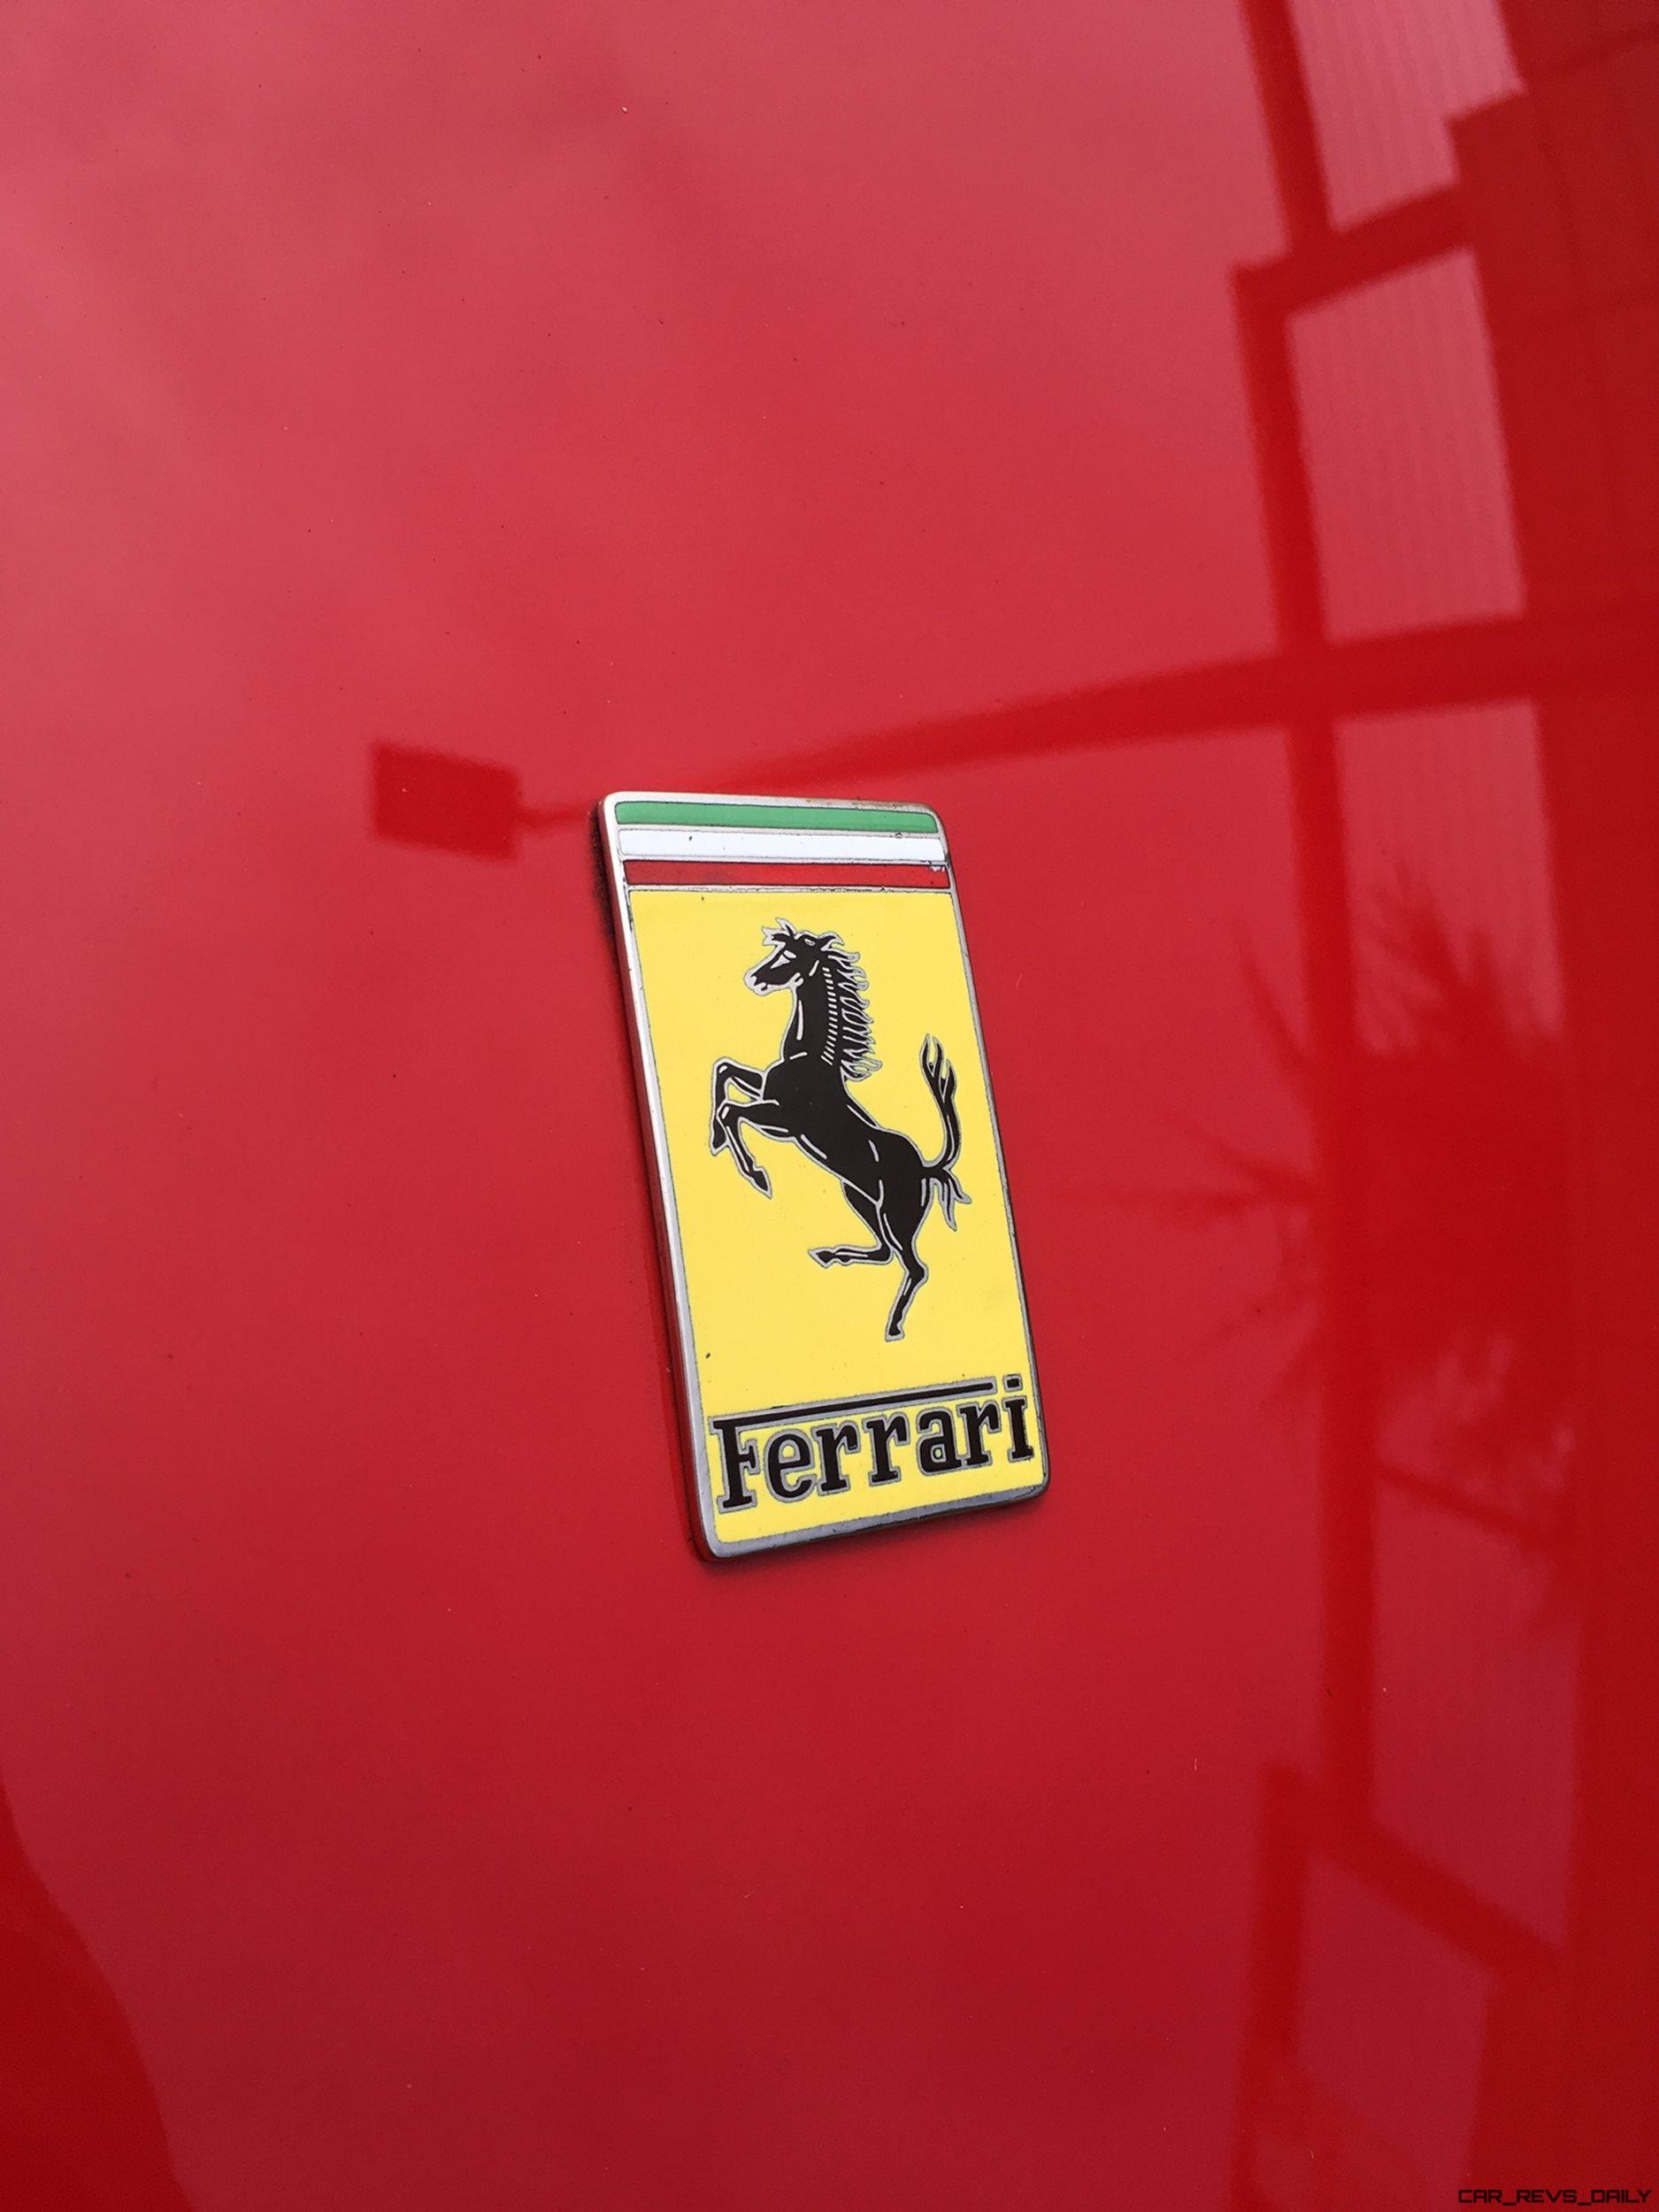 In Pictures: Pebble Beach 2017 - Welcome to CASA FERRARI » CAR SHOPPING